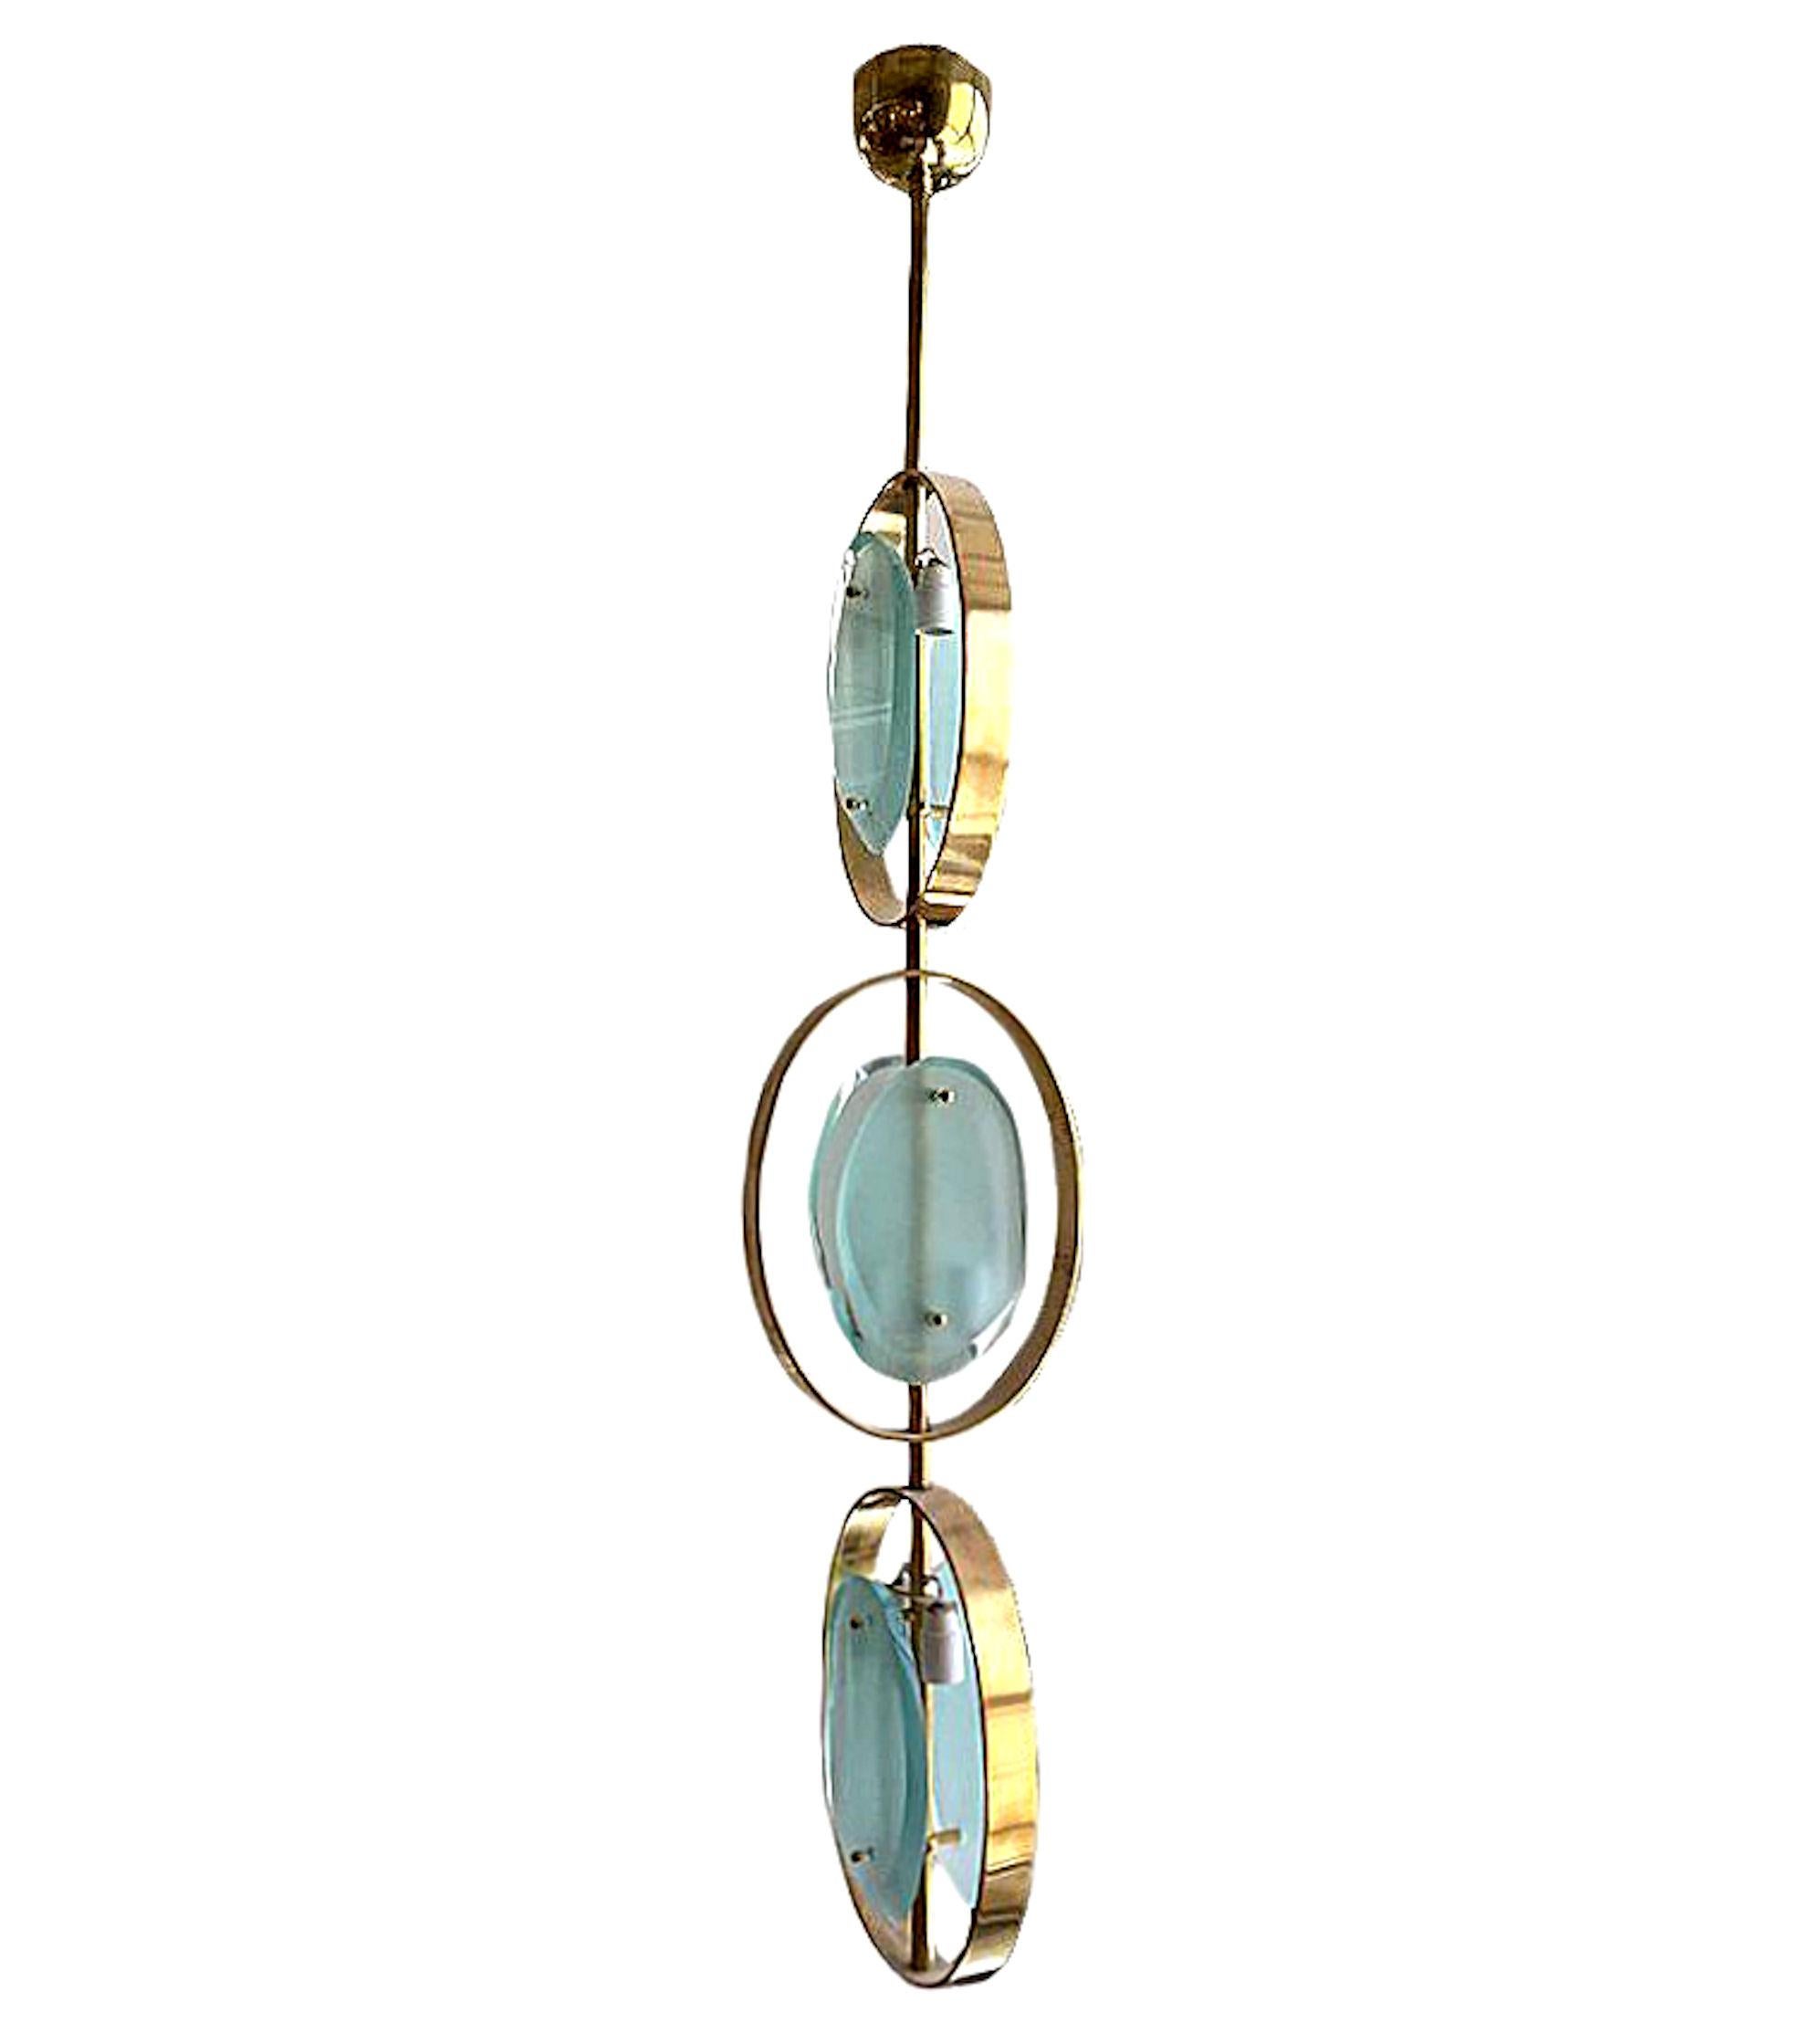 Mid-Century Modern green Murano glass and brass frame chandelier or pendant lighting. Attributed to Fontana Arte, Italy, 1960s.
Each 3 sections of the pendant is comprised of curved brass metals and two thick Murano green glass pieces with two